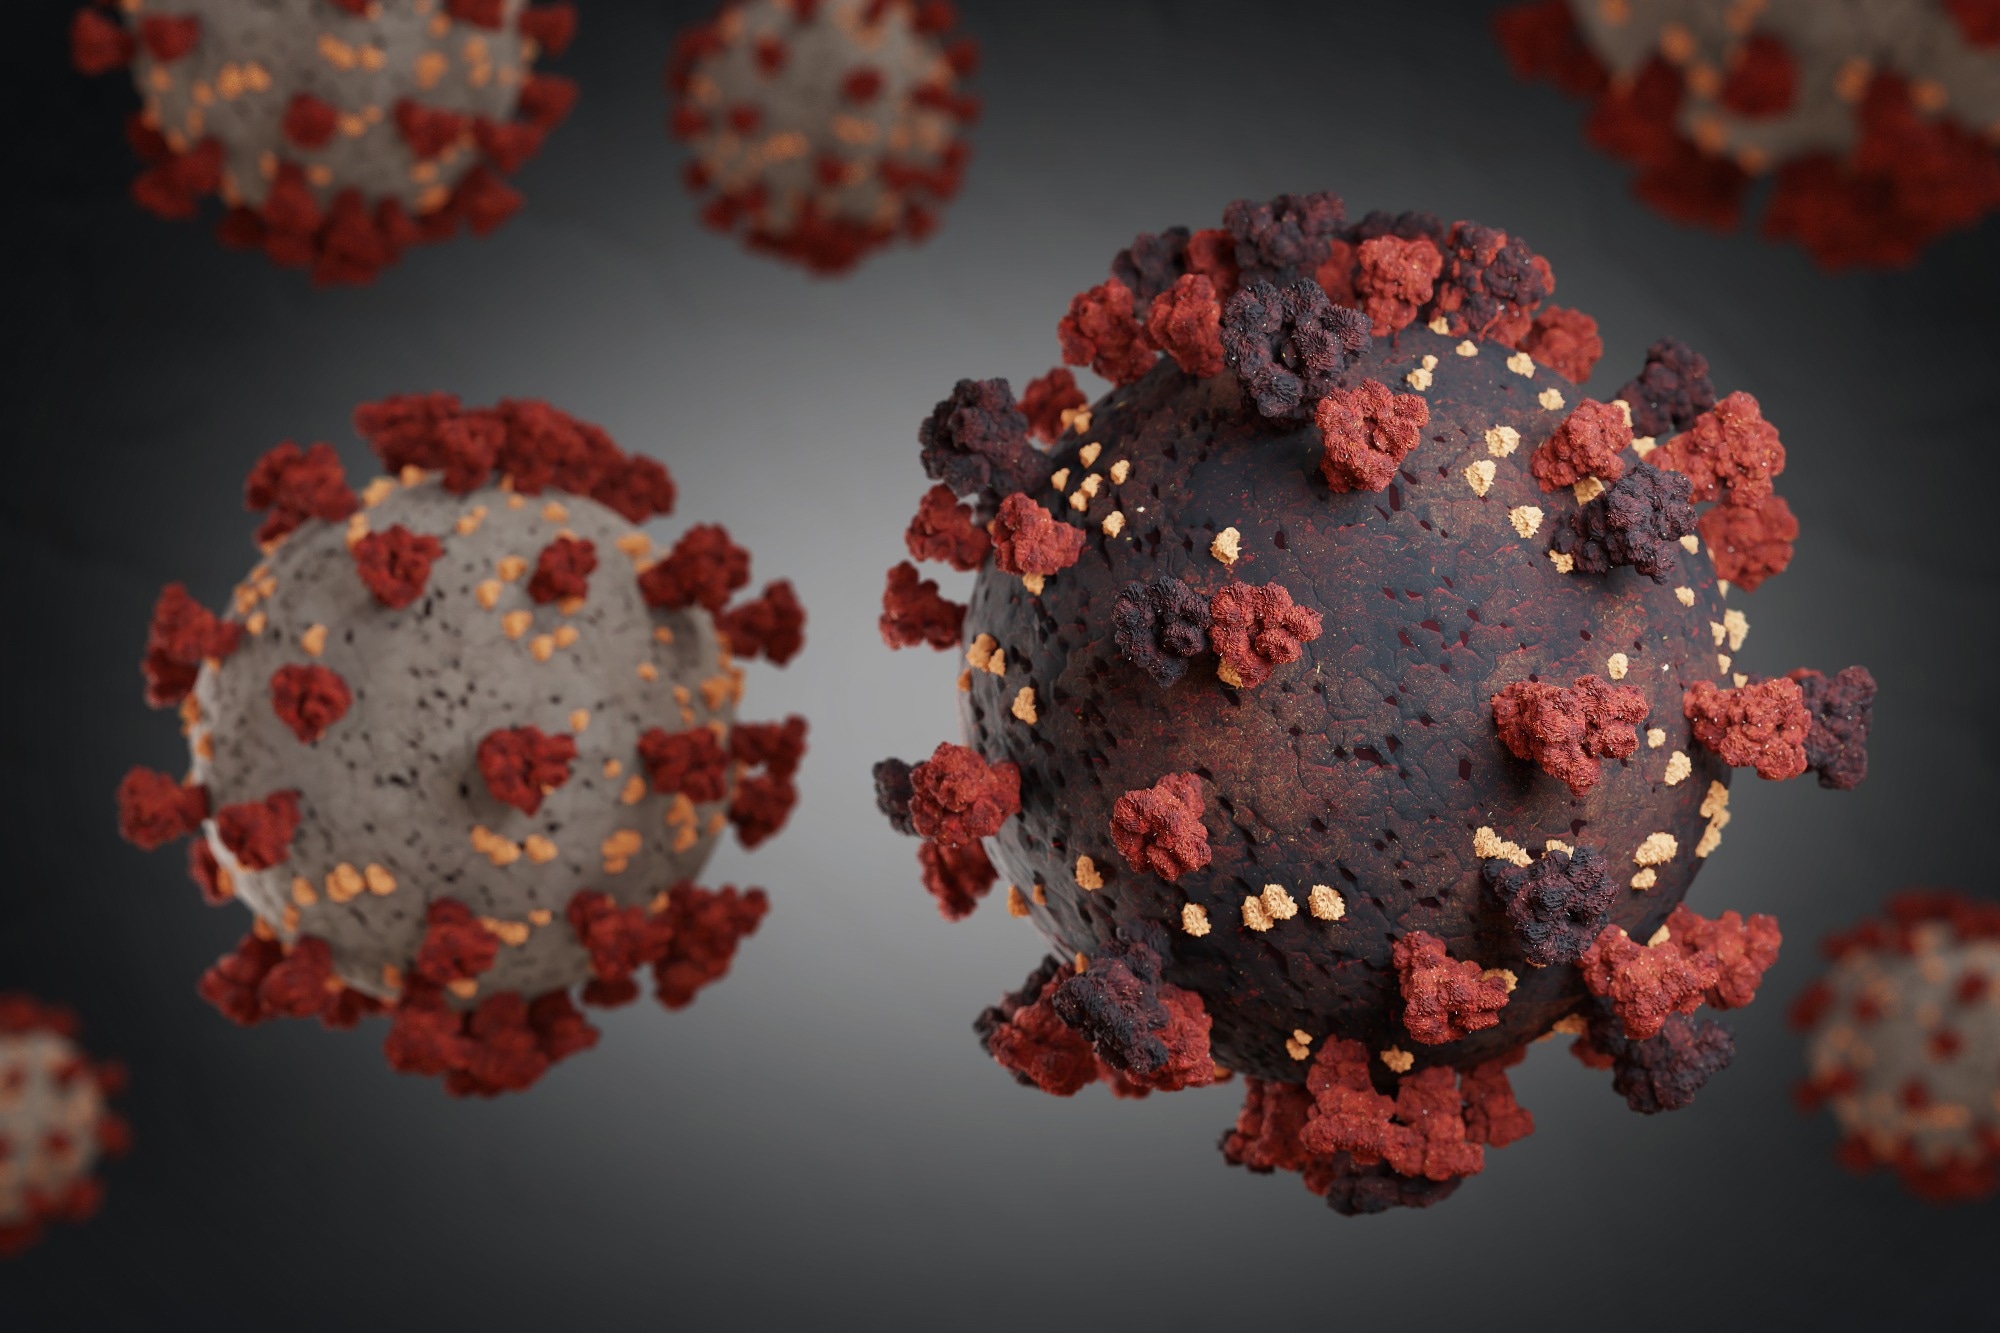 Study: Distinctive serotypes of SARS-related coronaviruses defined by convalescent sera from unvaccinated individuals. Image Credit: Imilian/Shutterstock.com